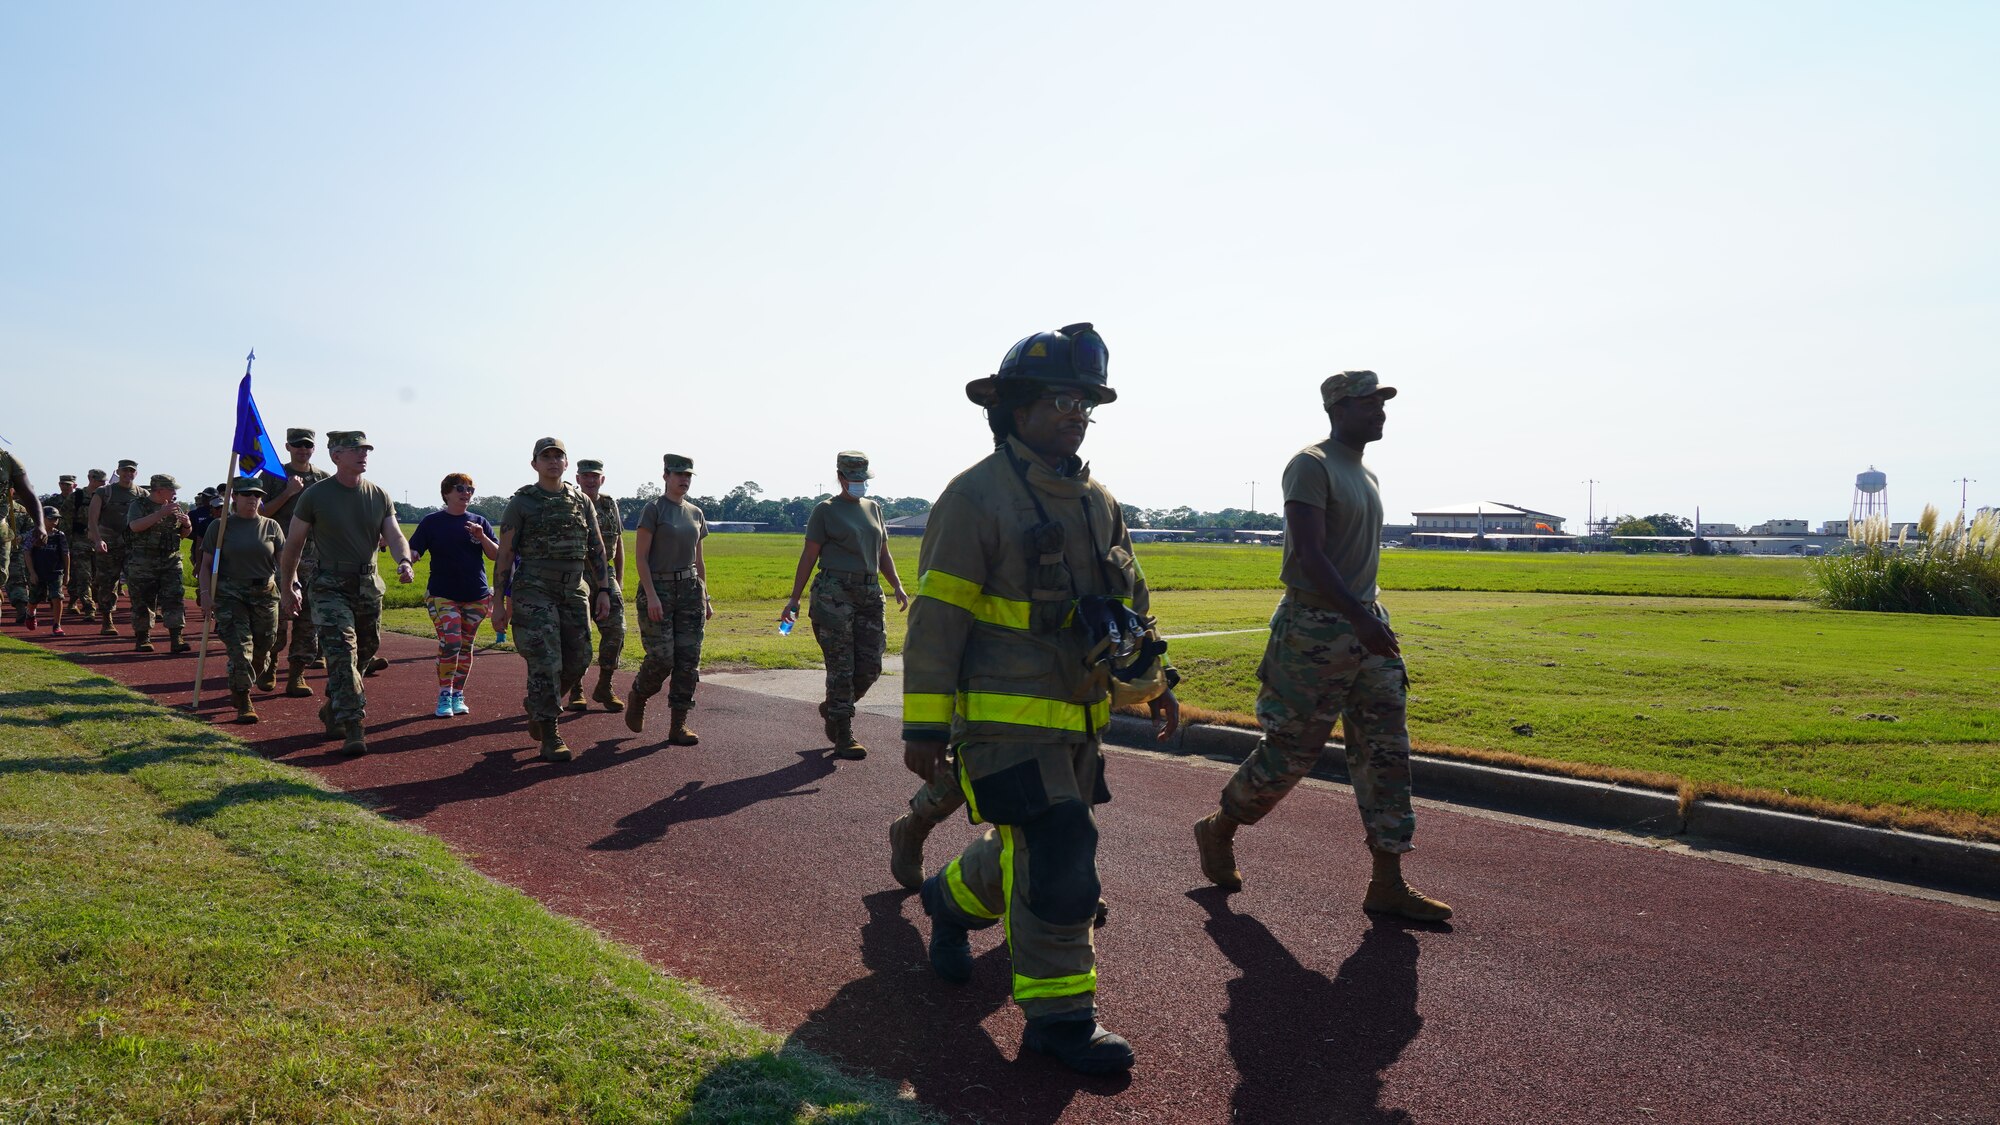 Tech. Sgt. James Haymer, civilian firefighter and traditional reservist with the 403rd Logistics Readiness Squadron, completed the ruck march in his fire fighter gear for the 403rd Wing's 20th Anniversary 9/11 Memorial Ruck March, which was hosted in rembrance of those who lost their lives during the events of 9/11. The march was led by the 403rd Security Forces Squadron and was open to all members of Keesler Air Force Base, both military and civilian. (U.S. Air Force photo by 2nd Lt. Christopher Carranza)